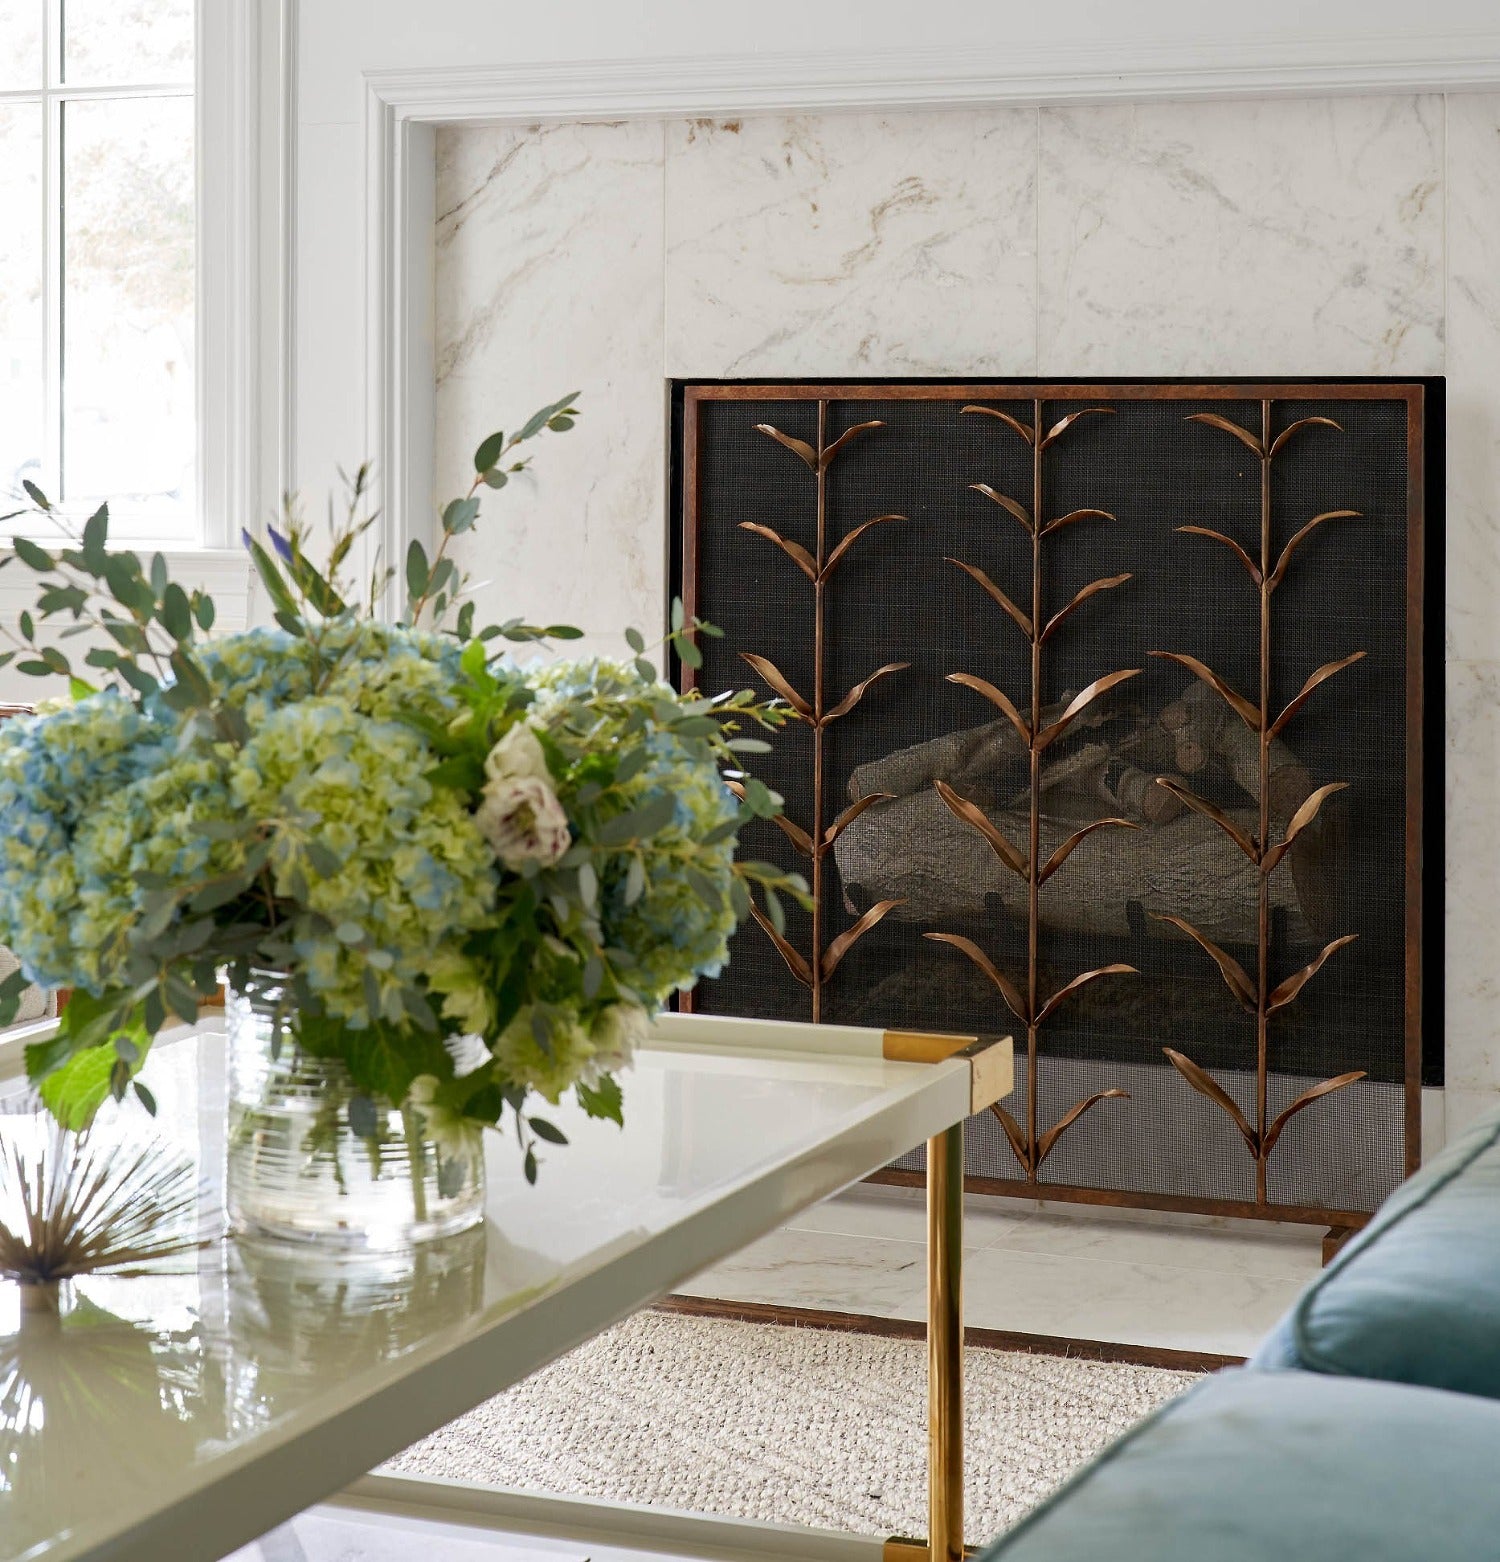 Lily Stems Fireplace Screen lifestyle image with Hydrangea Floral Arrangement 